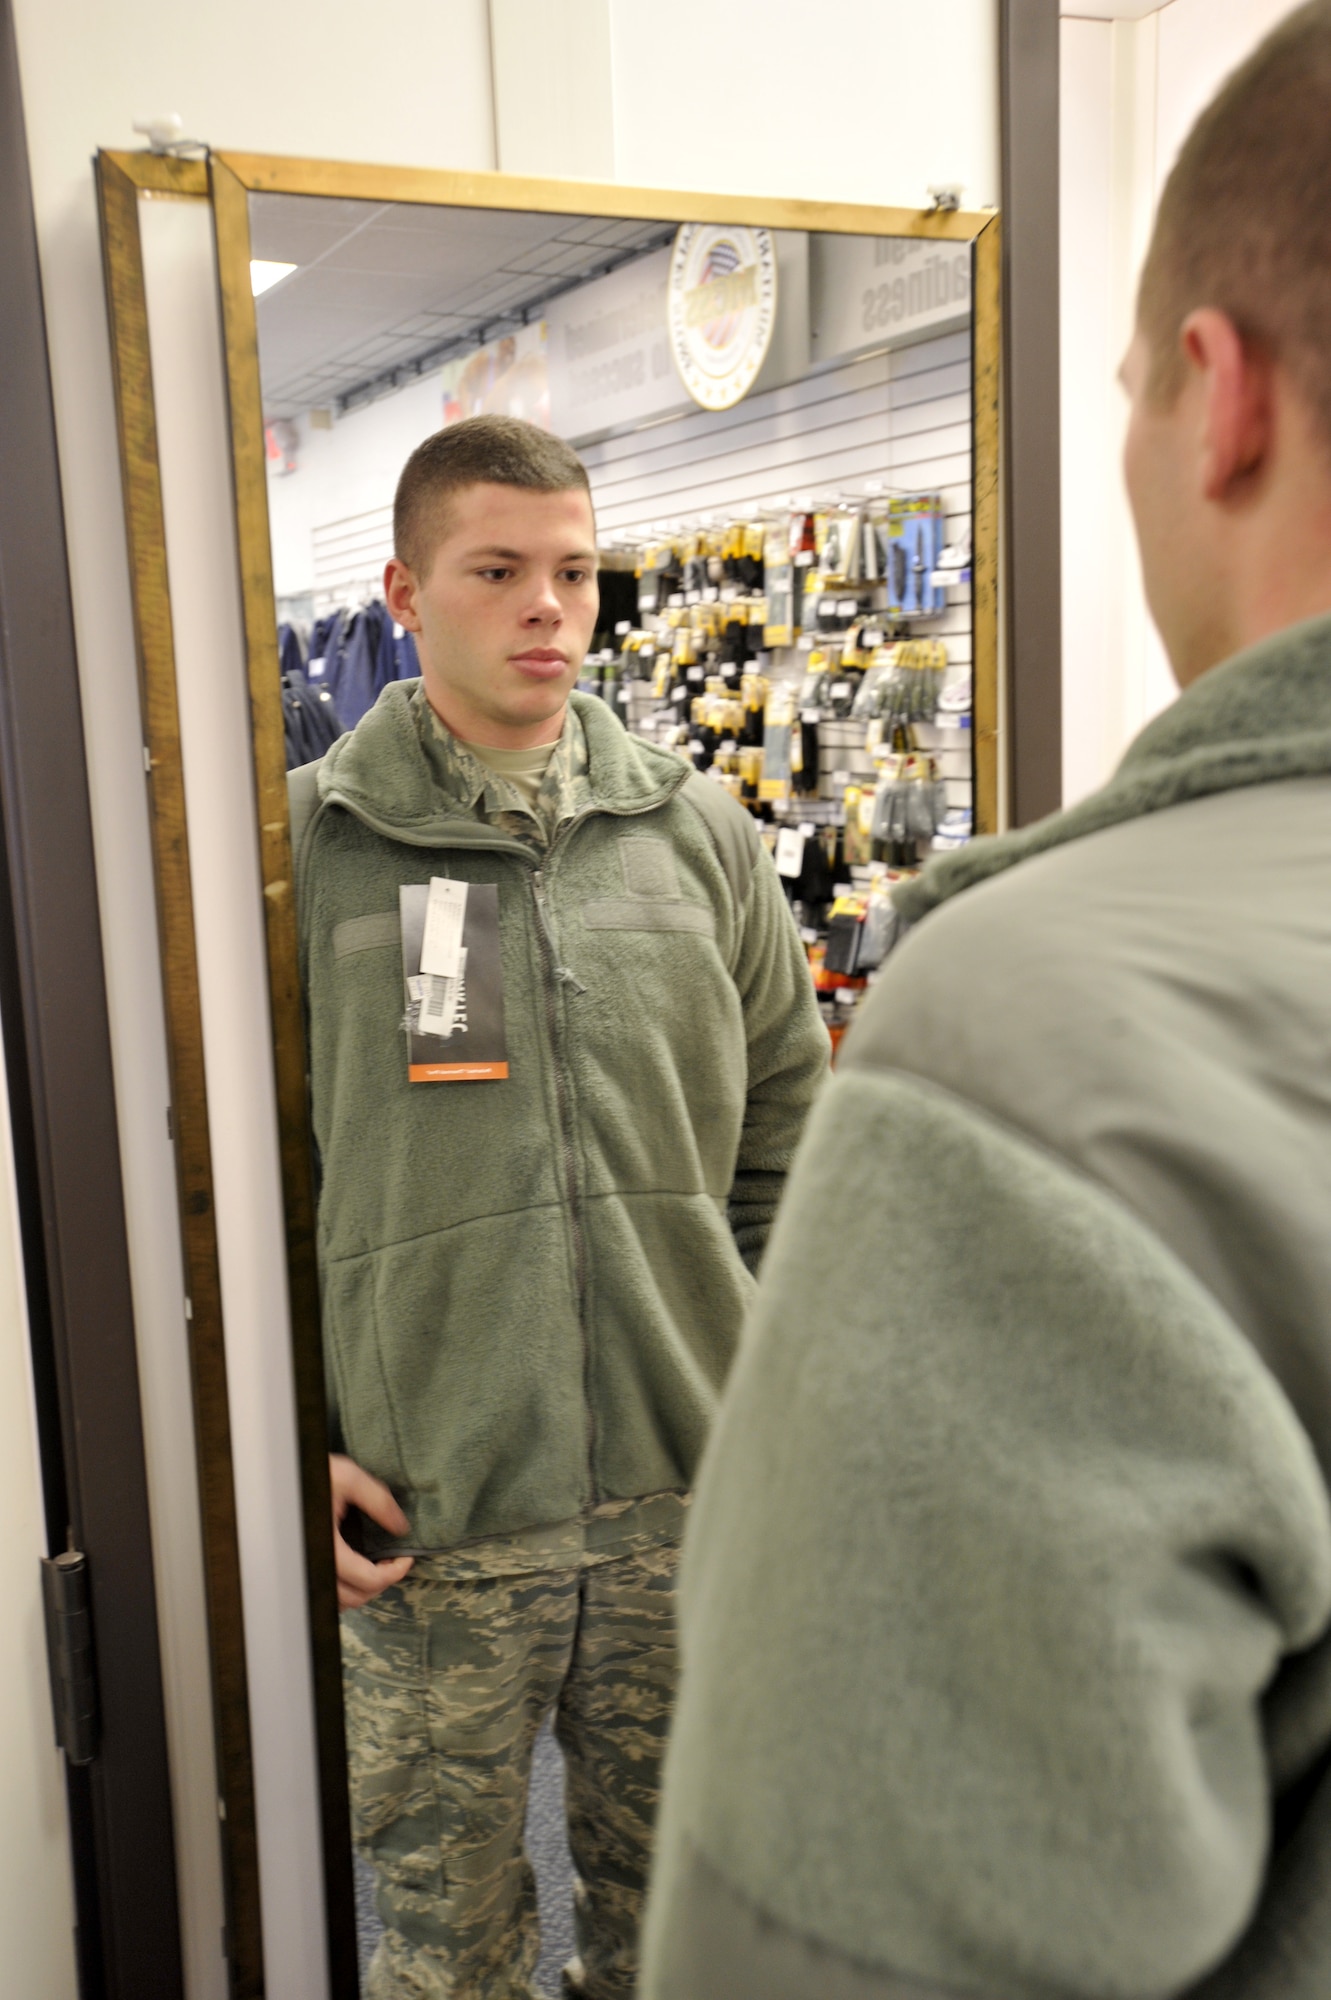 Senior Airman Lon Fluman of the 712th Aircraft Maintenance Squadron tries on a fleece jacket at the Military Clothing Sales Store on Dover Air Force Base, Del., Jan. 25, 2011. Fleece jackets and other cold-weather gear are popular items at clothing sales due to the recent cold weather. (U.S. Air Force photo by Tech. Sgt. Chuck Walker/Released)